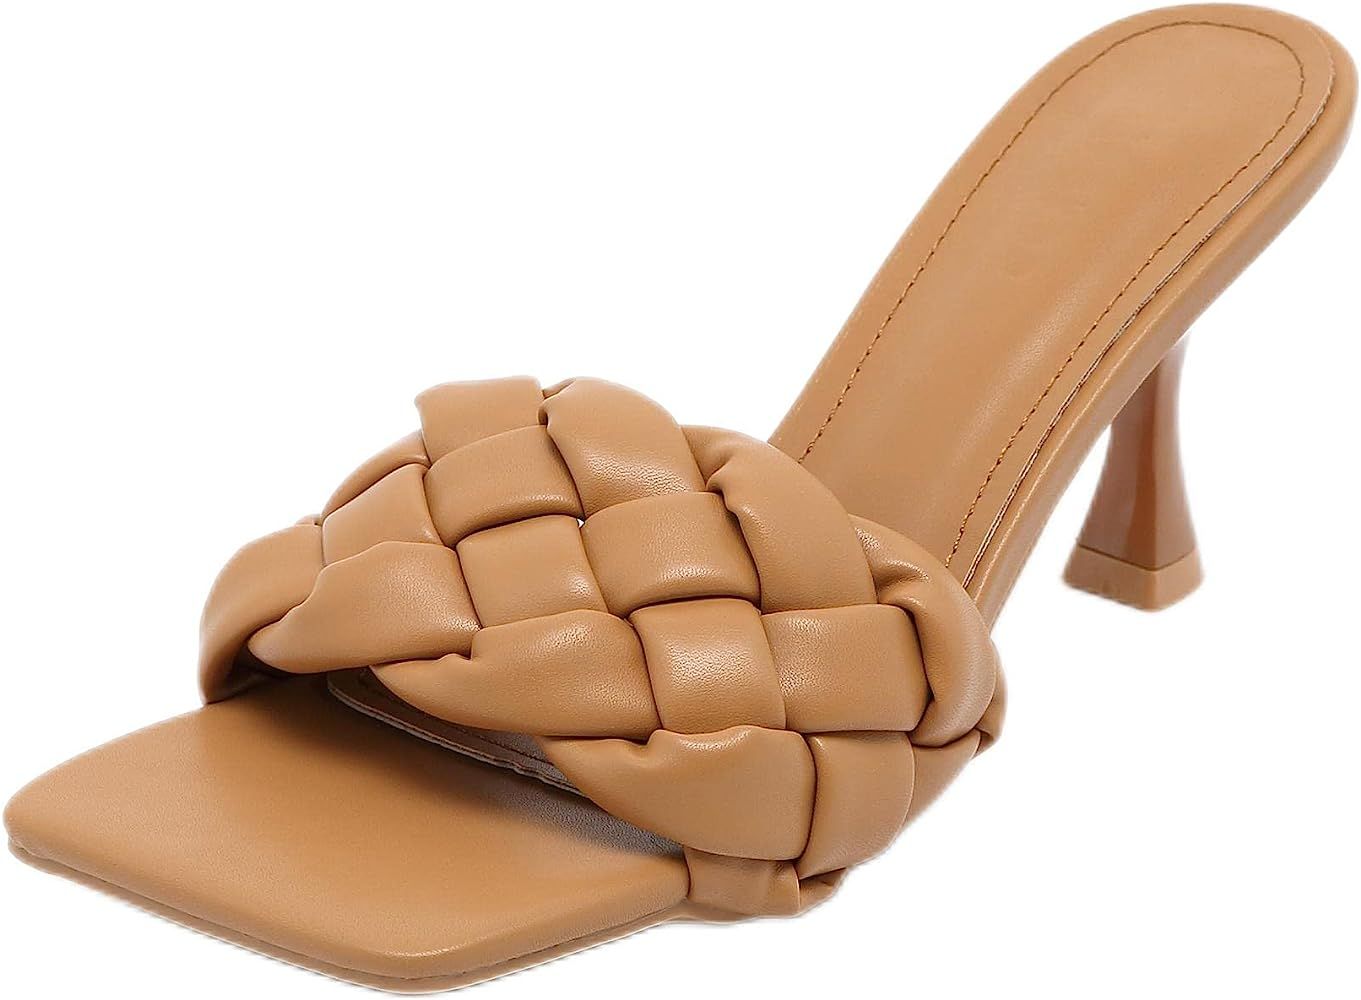 Women’s Braided Heeled Sandals Square Open Toe Woven Mule Stiletto High Heel Slip On Quilted Leather | Amazon (US)